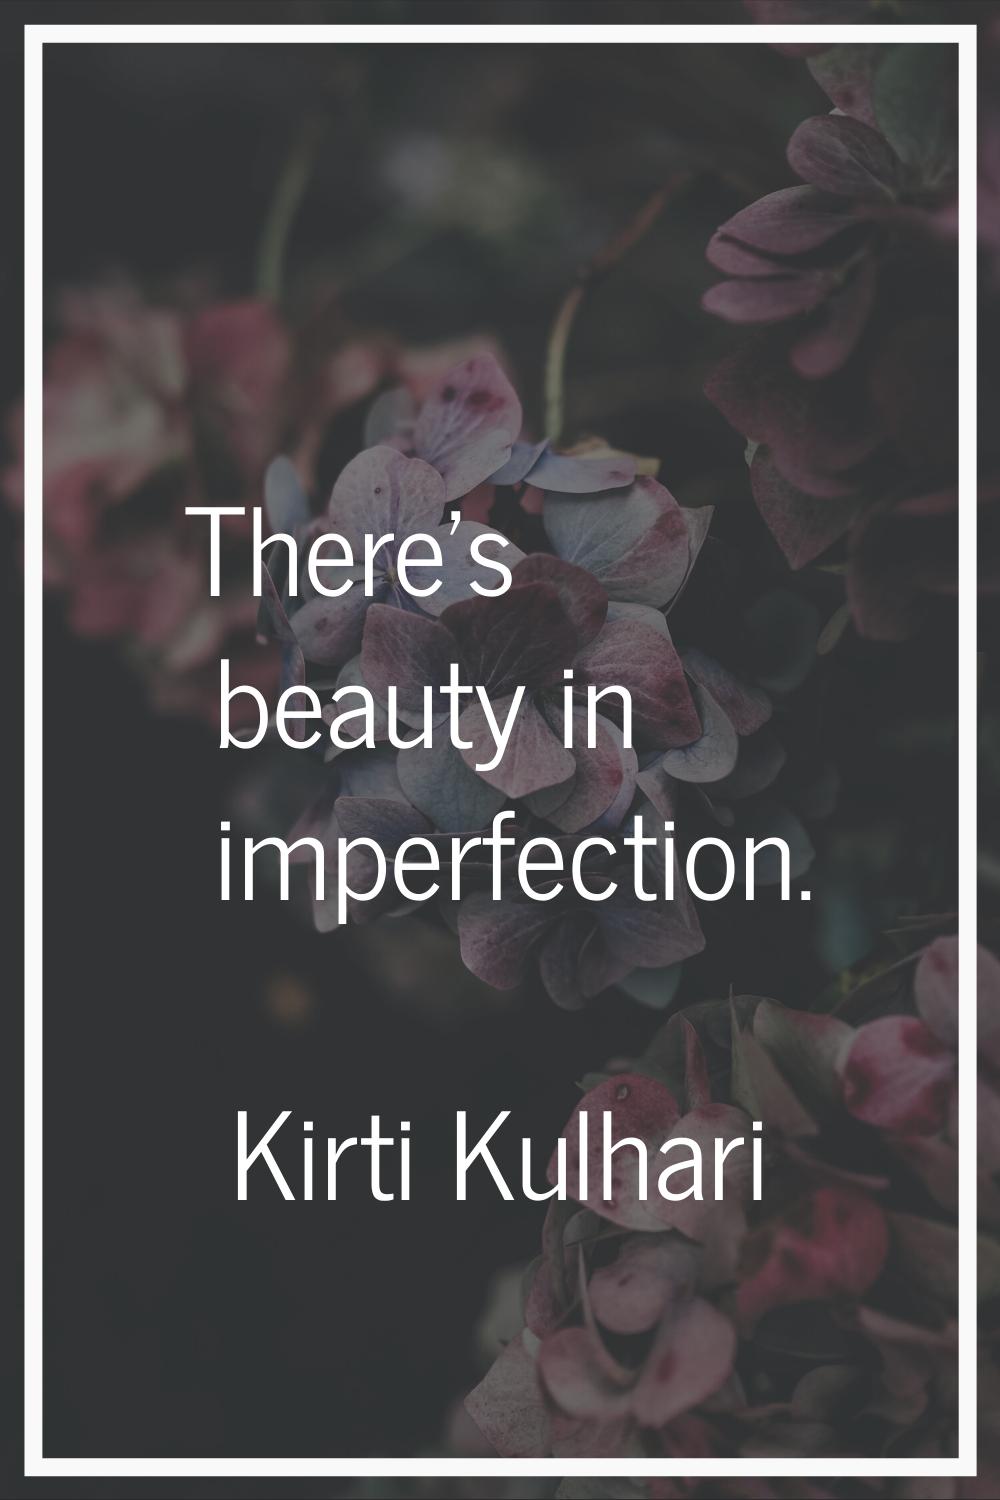 There's beauty in imperfection.